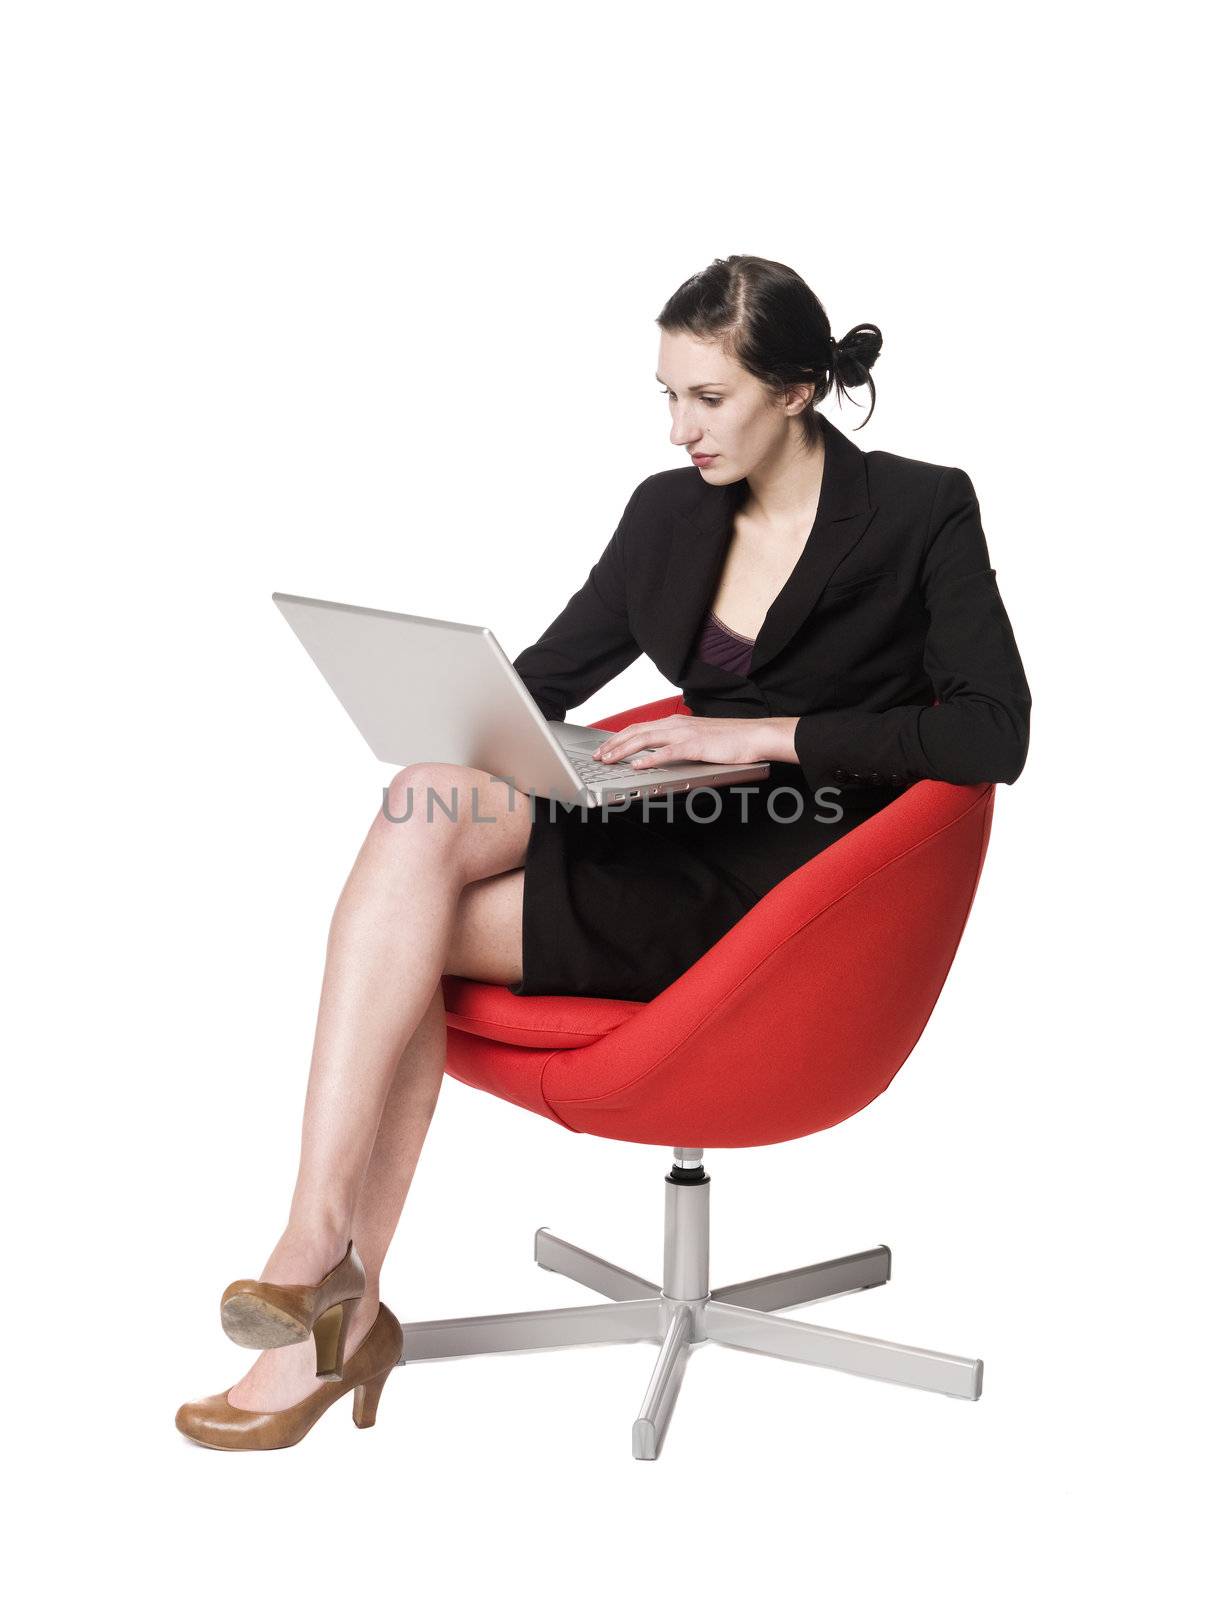 Woman with a power-book sitting in a chair by gemenacom